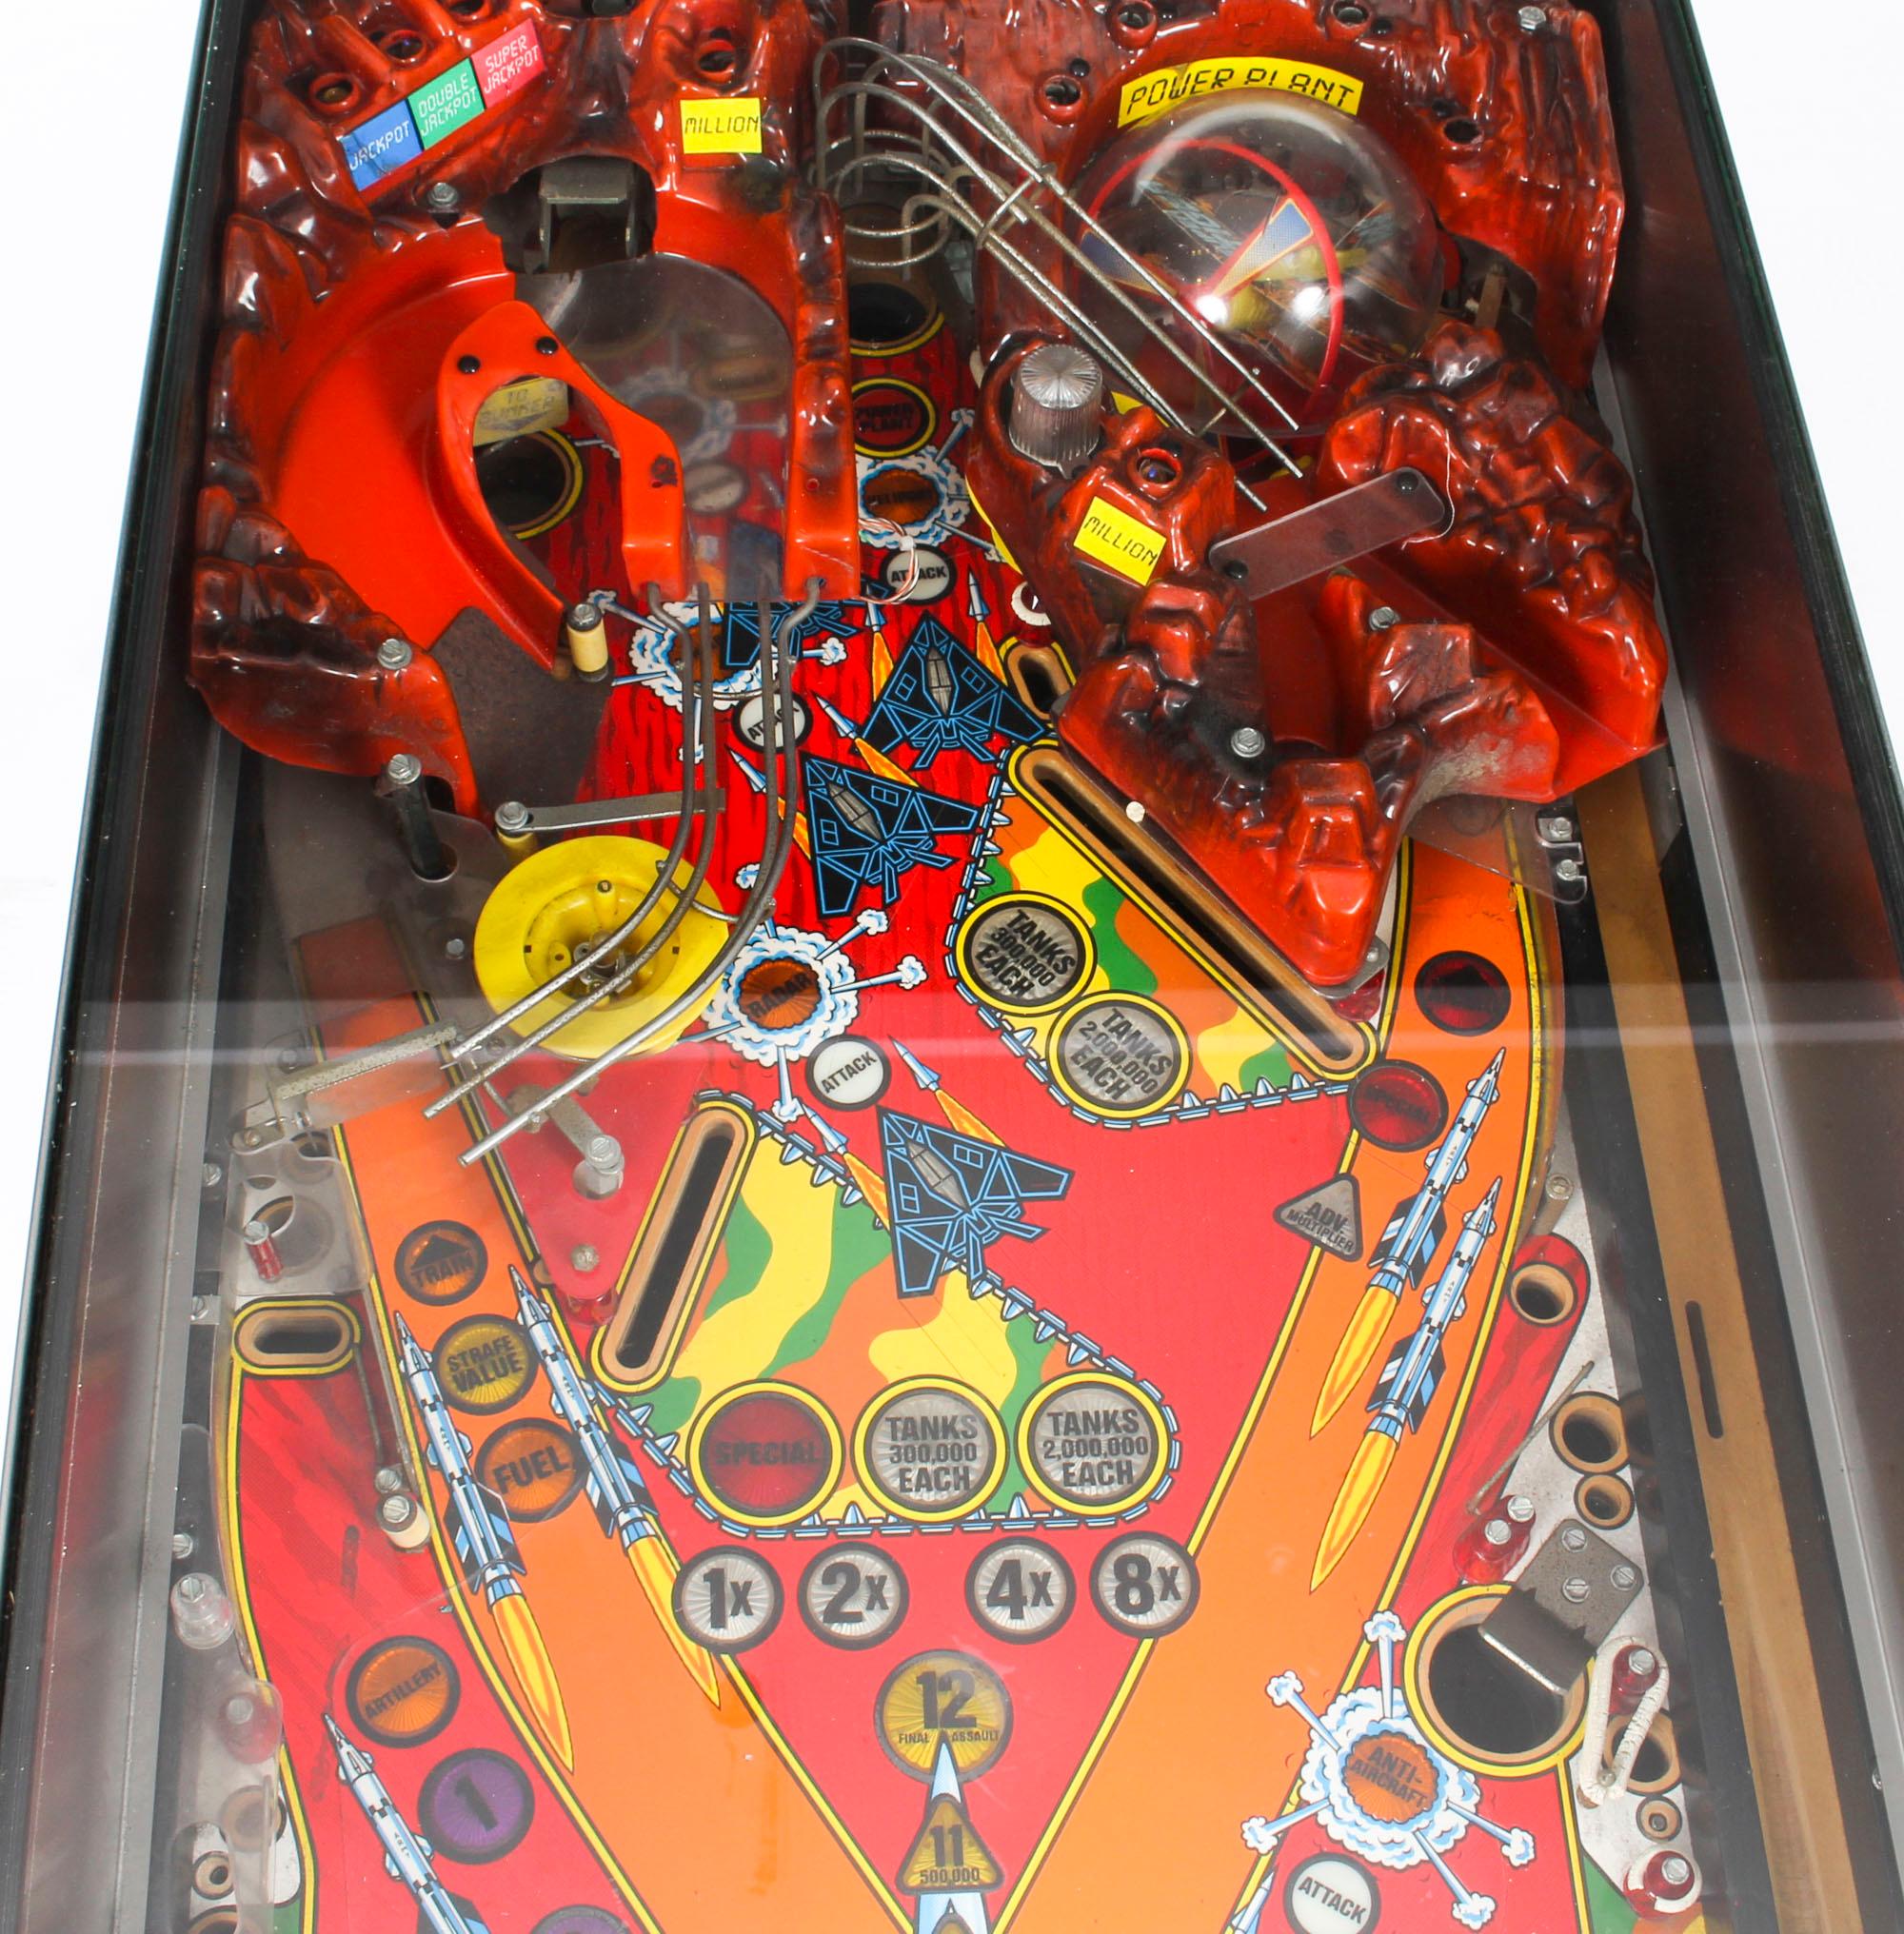 American Vintage Light-Up Glass Top Coffee Table Gottlieb Pinball Playfield Midcentury